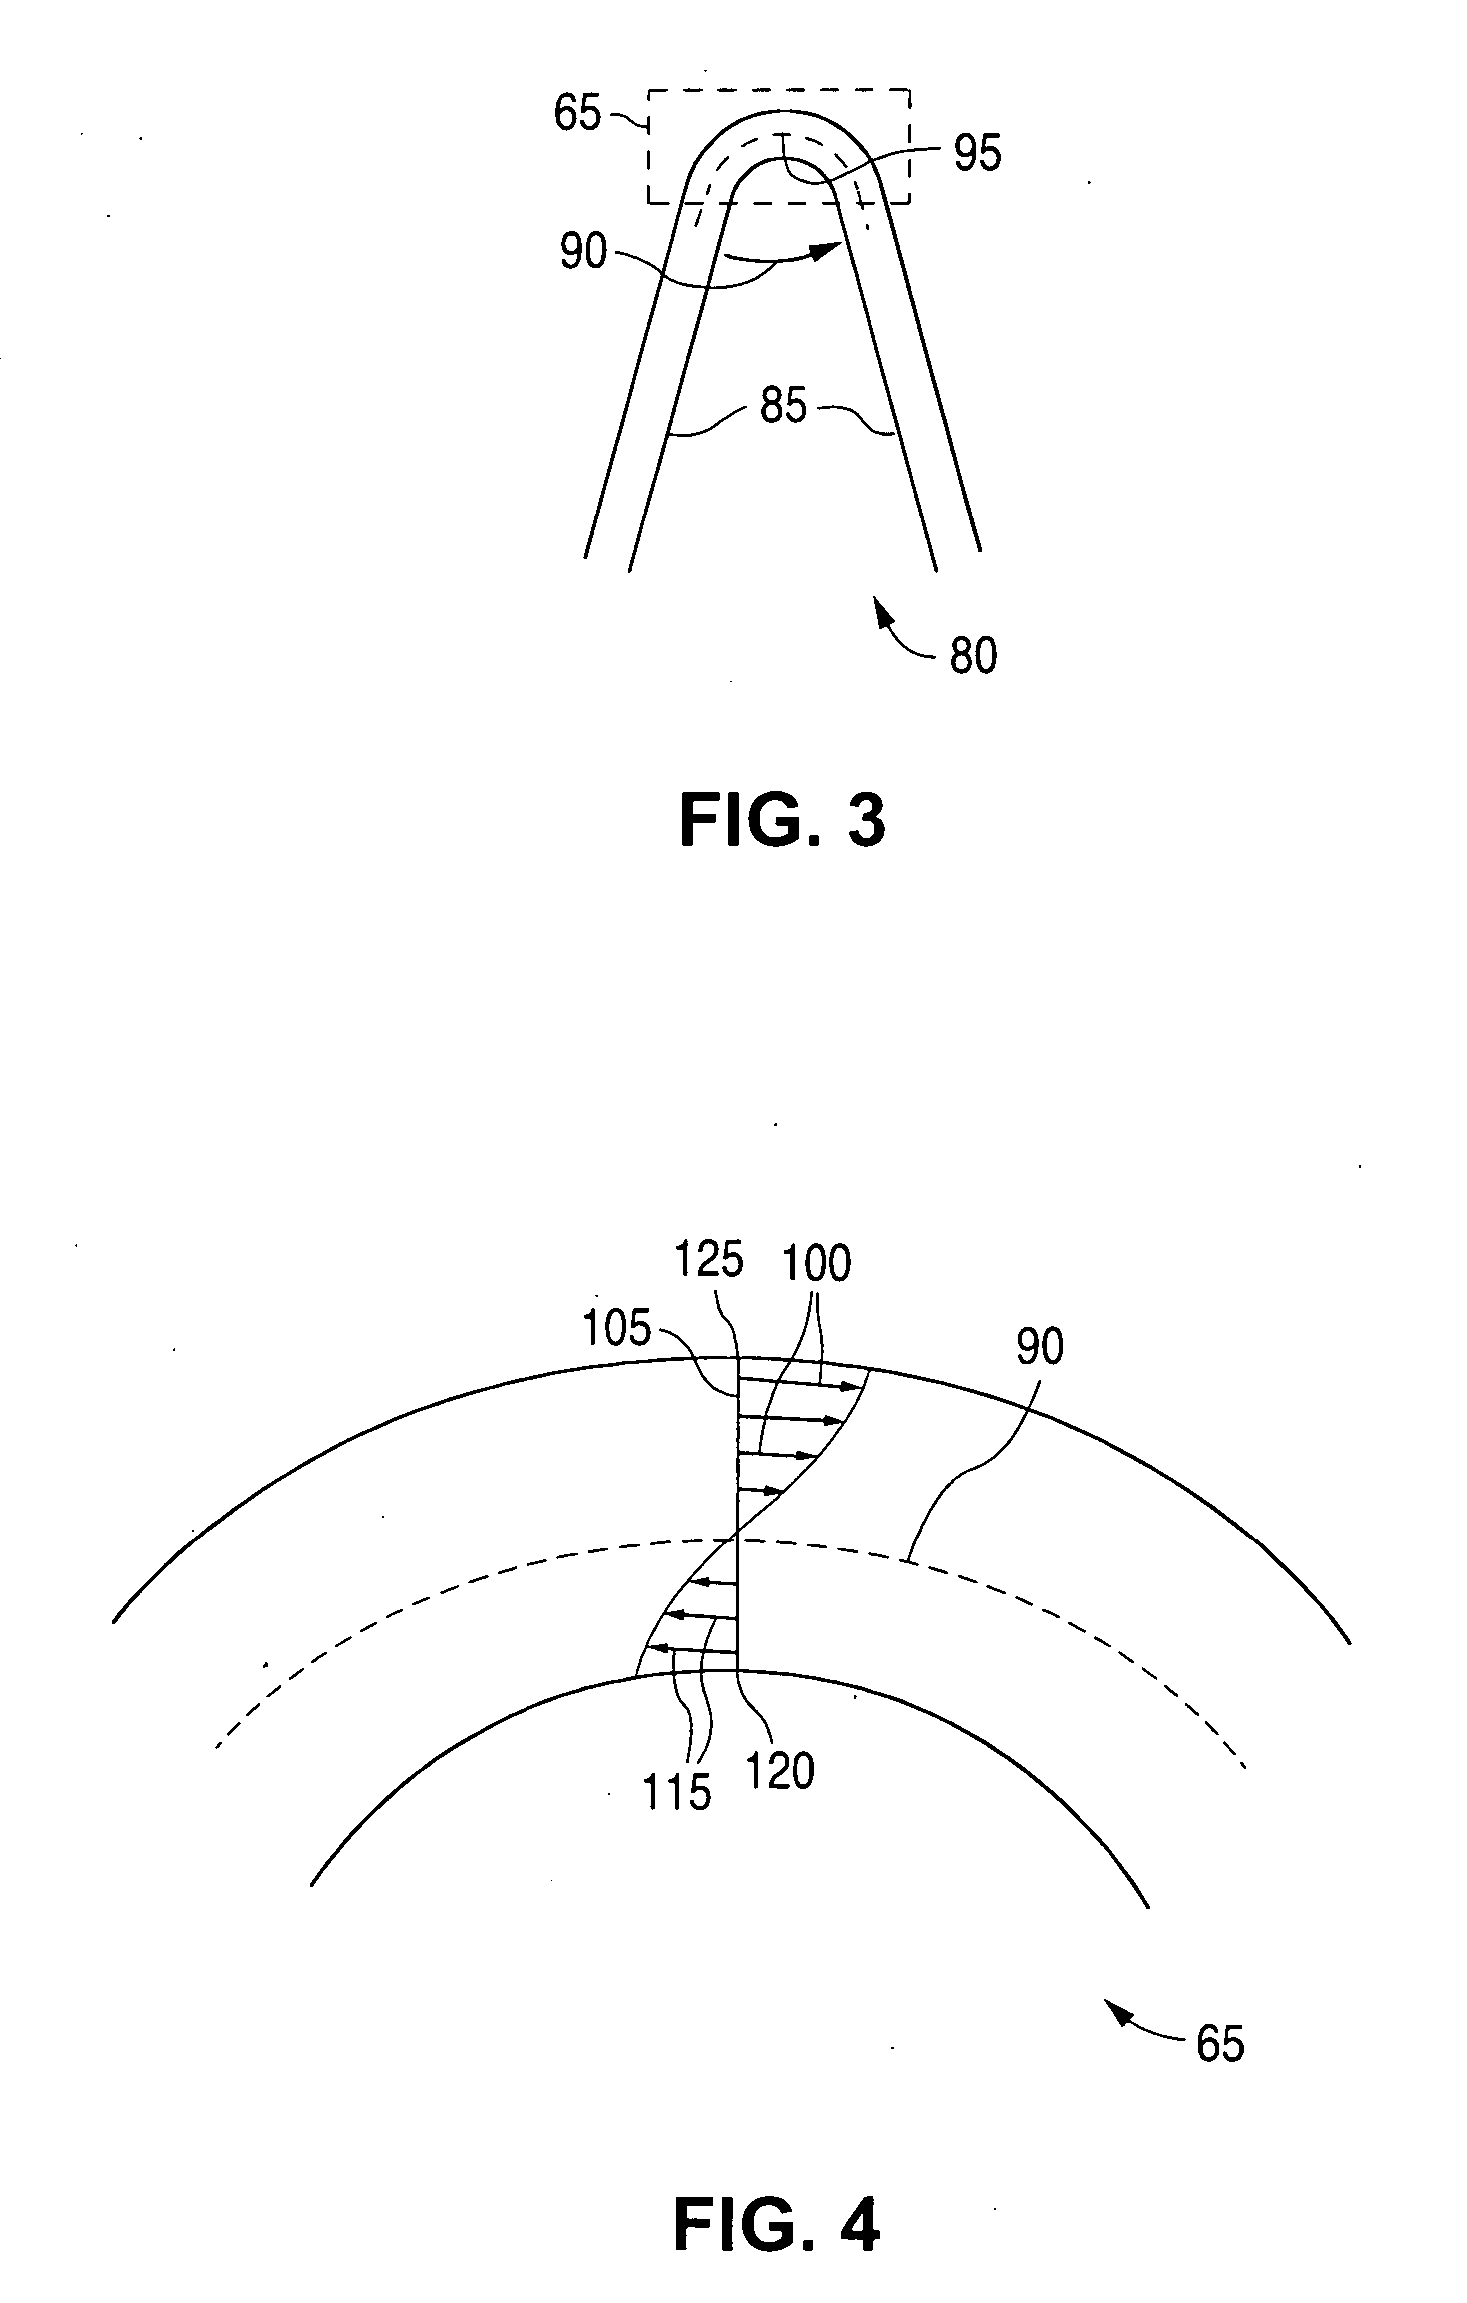 Method of fabricating a biaxially oriented implantable medical device